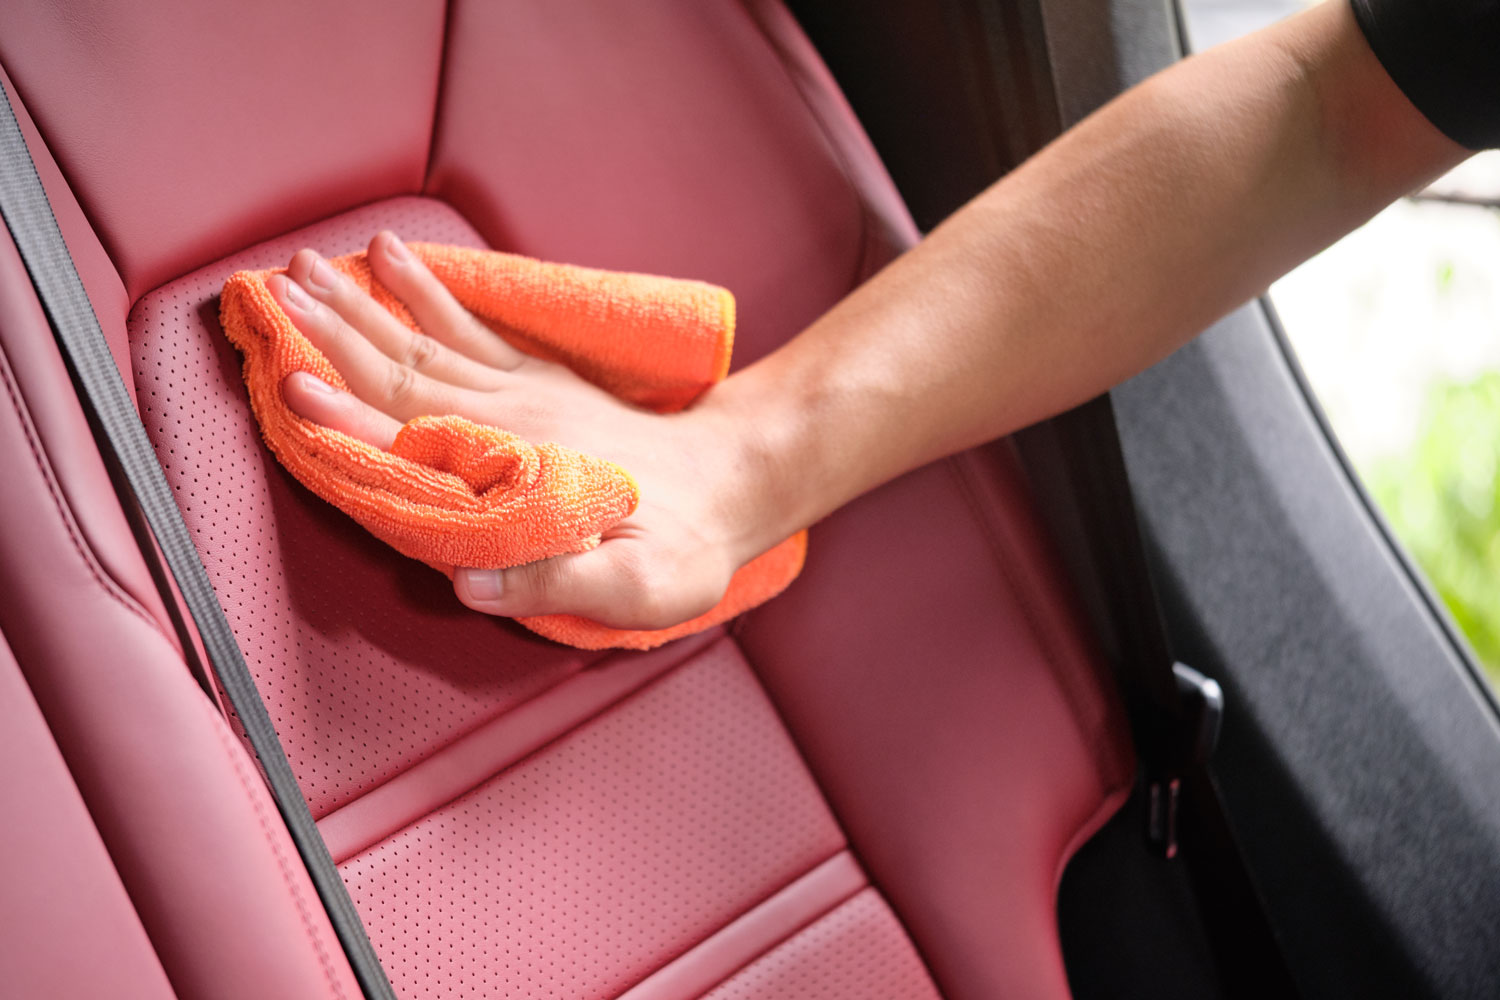 How to Clean Car Seats - How to Clean Cloth or Leather Car Seats